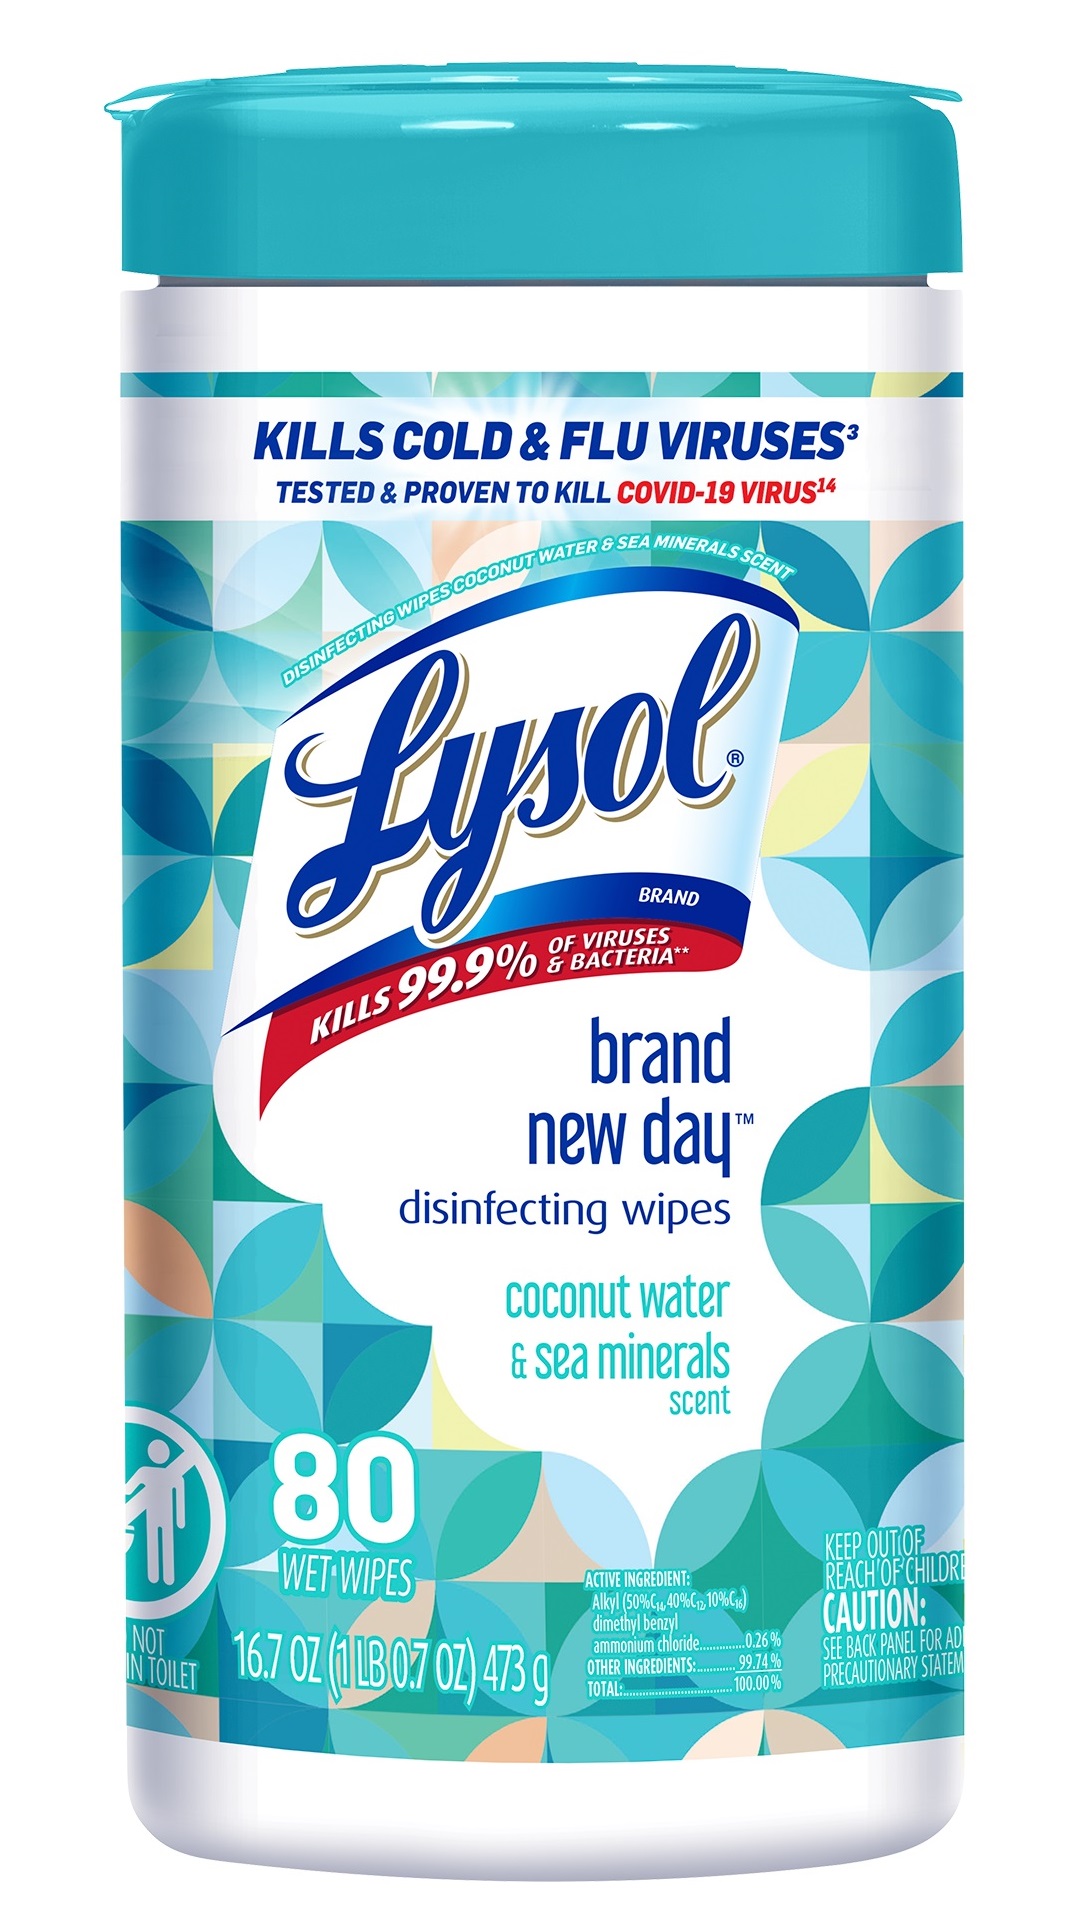 LYSOL Disinfecting Wipes  Brand New Day  Coconut Water  Sea Minerals Discontinued Jan 2022